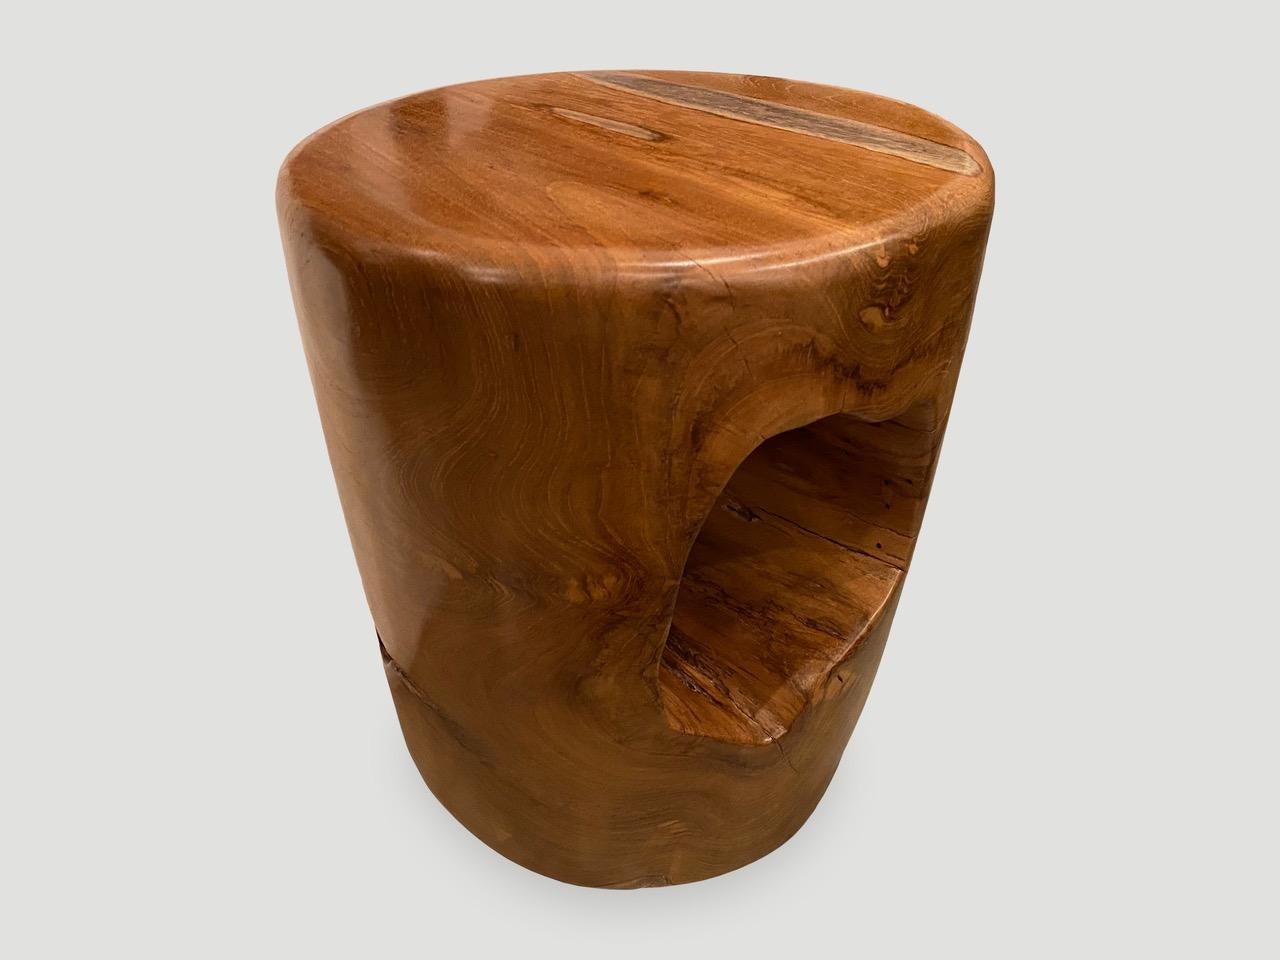 Cylinder teak side table with a natural hole in the center. We sanded and smoothed the teak wood exposing the beautiful grain. Organic is the new modern.

Own an Andrianna Shamaris original.

Andrianna Shamaris. The Leader In Modern Organic